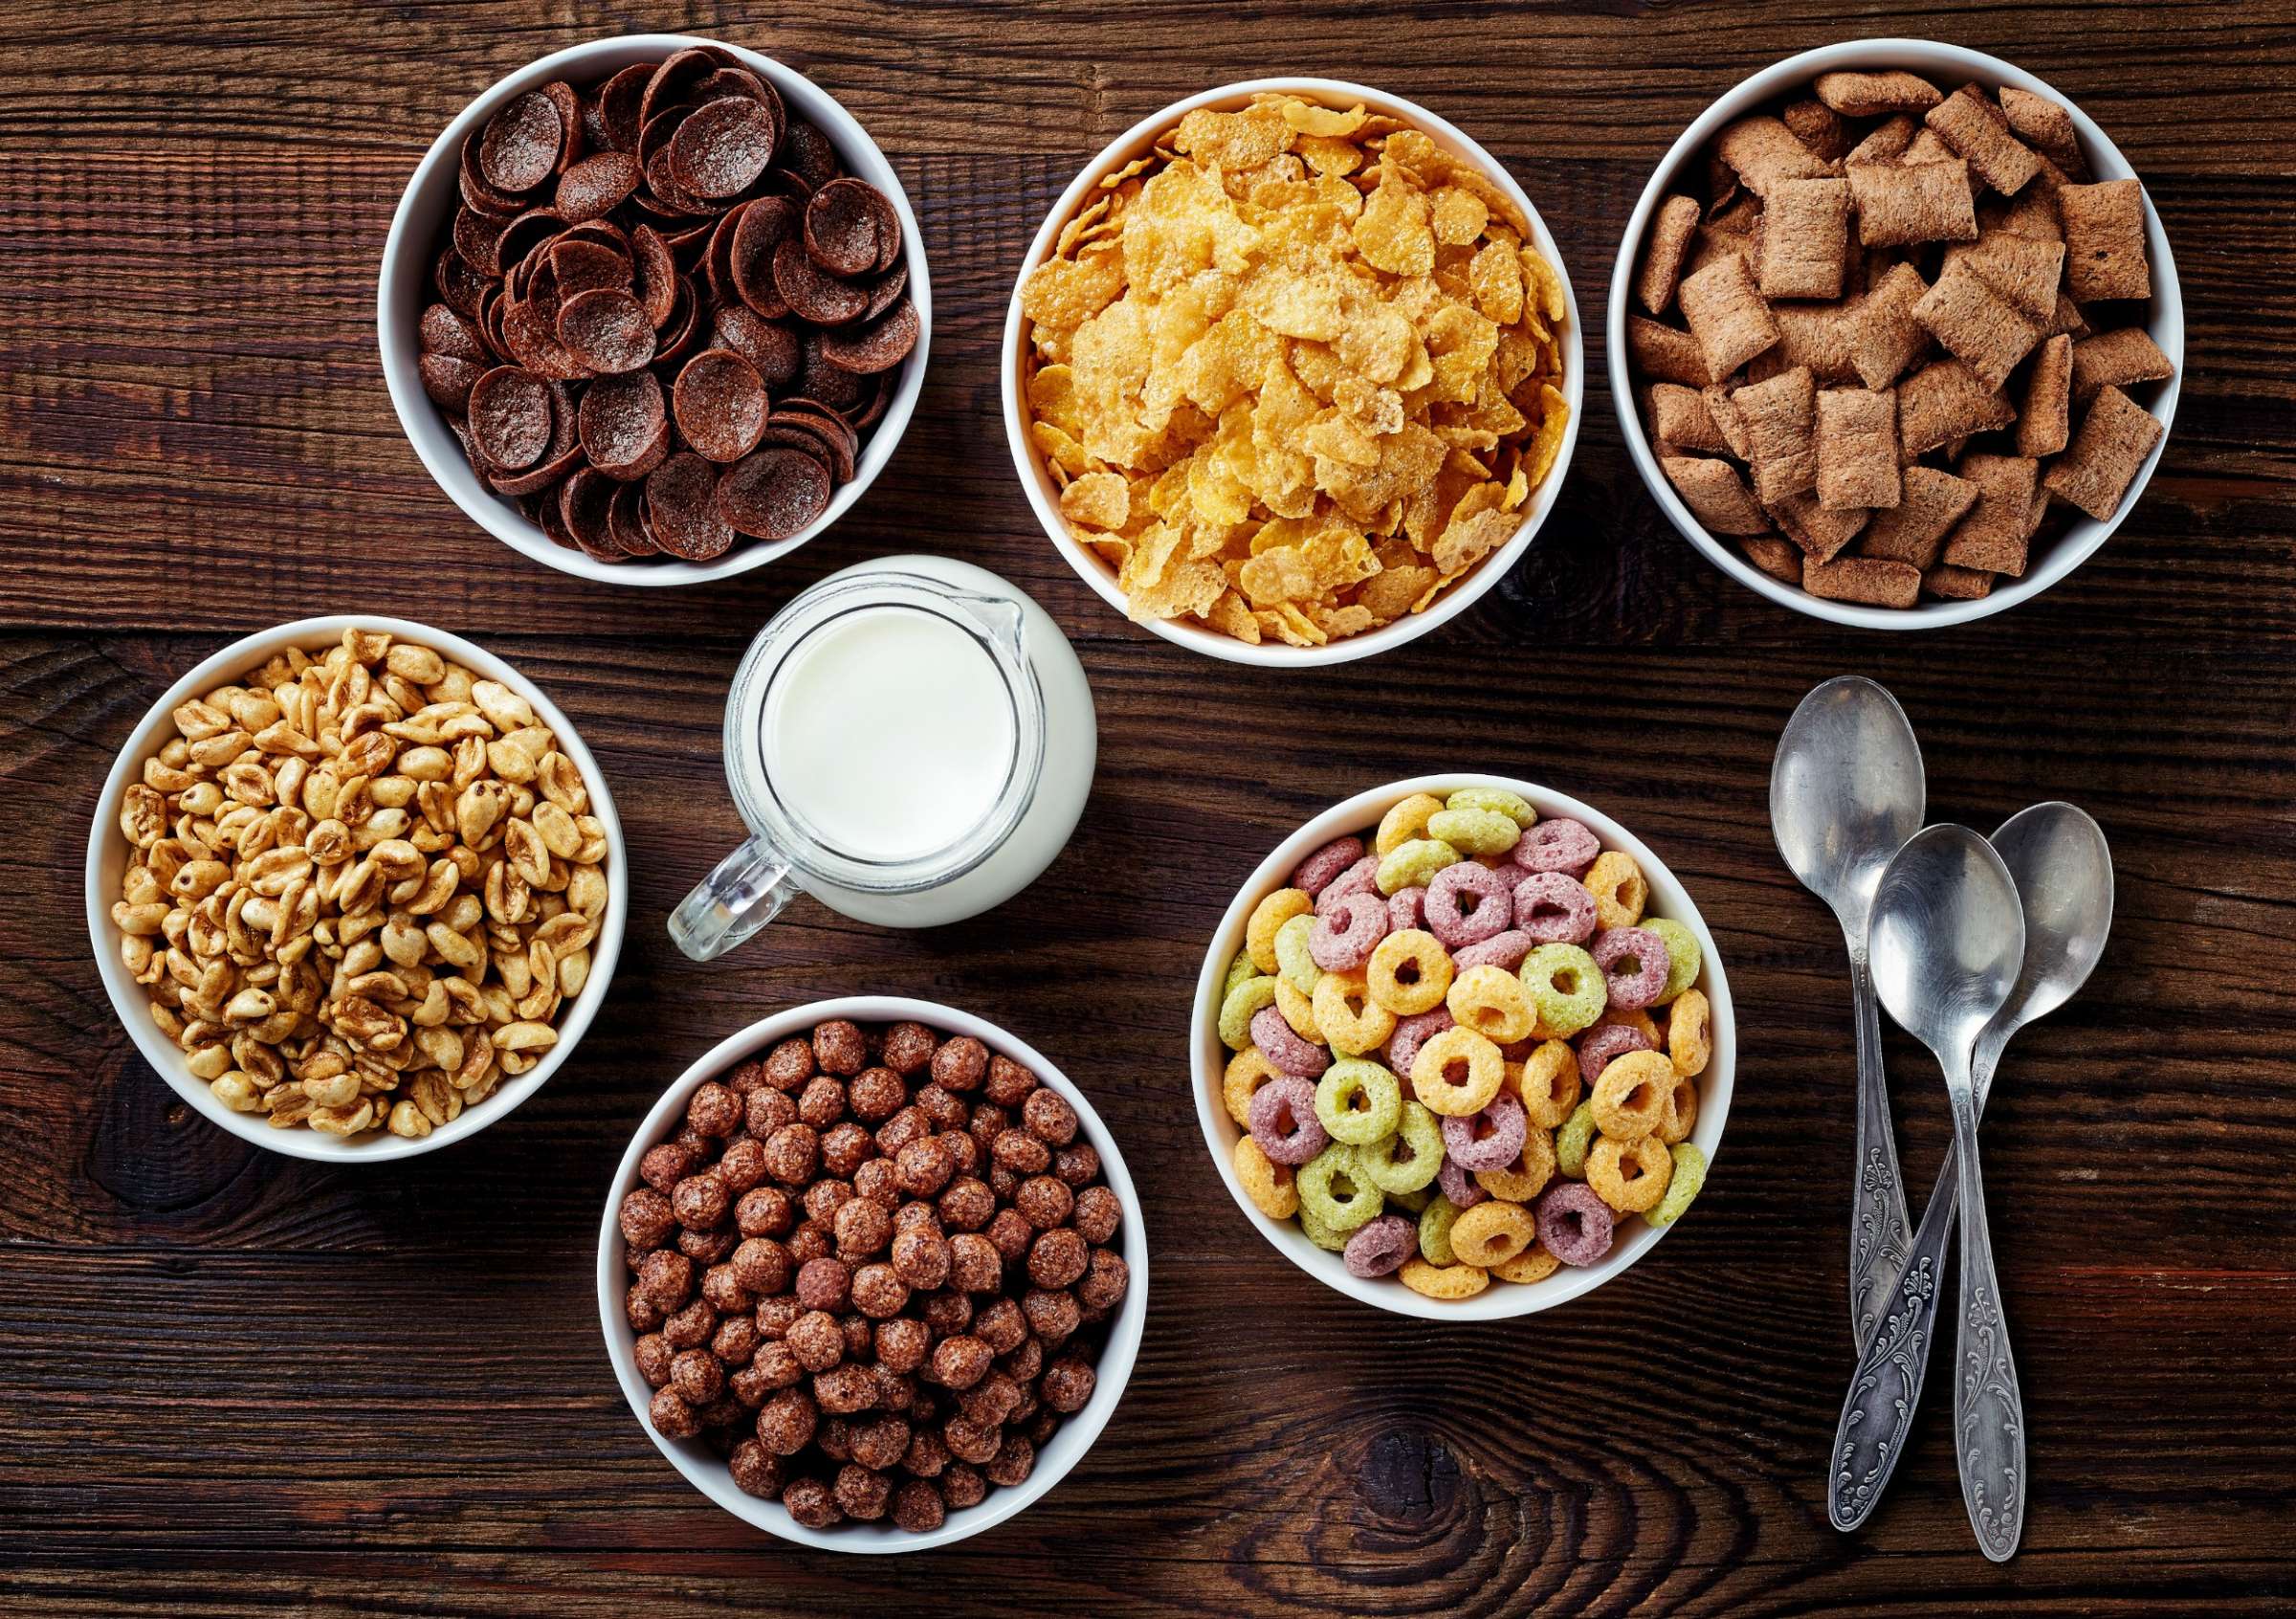 Background image: Cereal